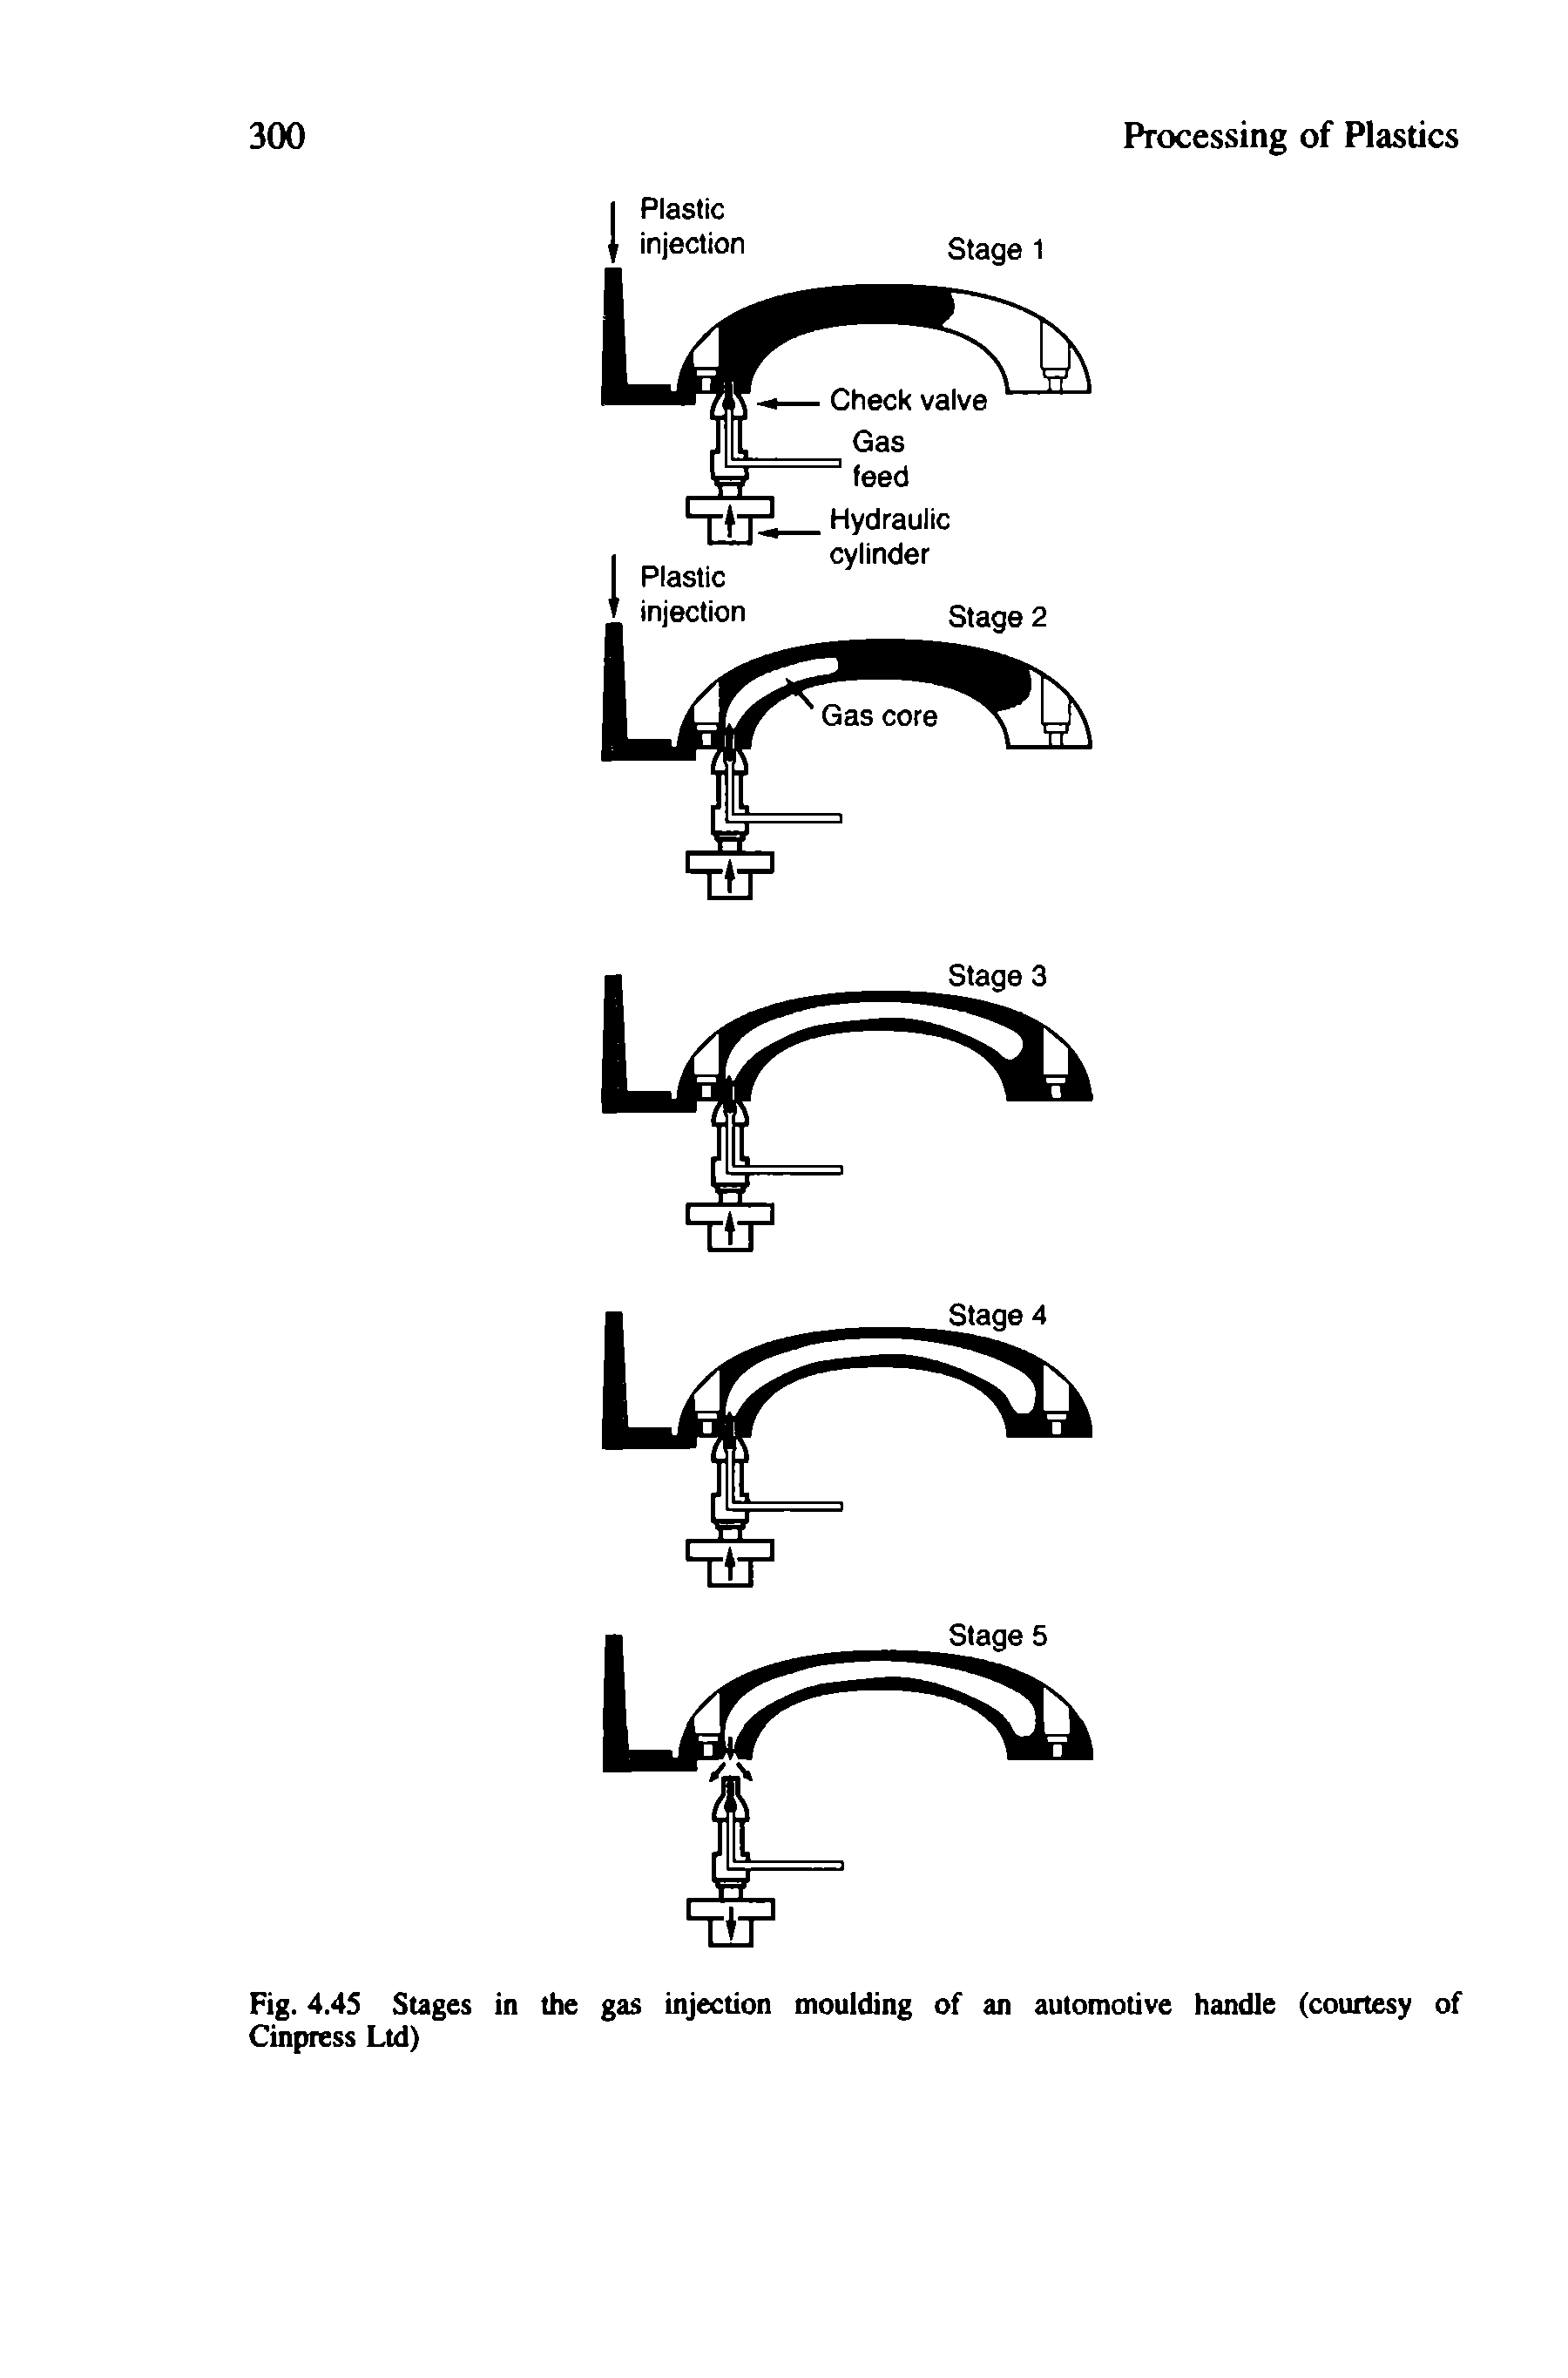 Fig. 4.4S Stages in the gas injection moulding of an automotive handle (courtesy of Cinpress Ltd)...